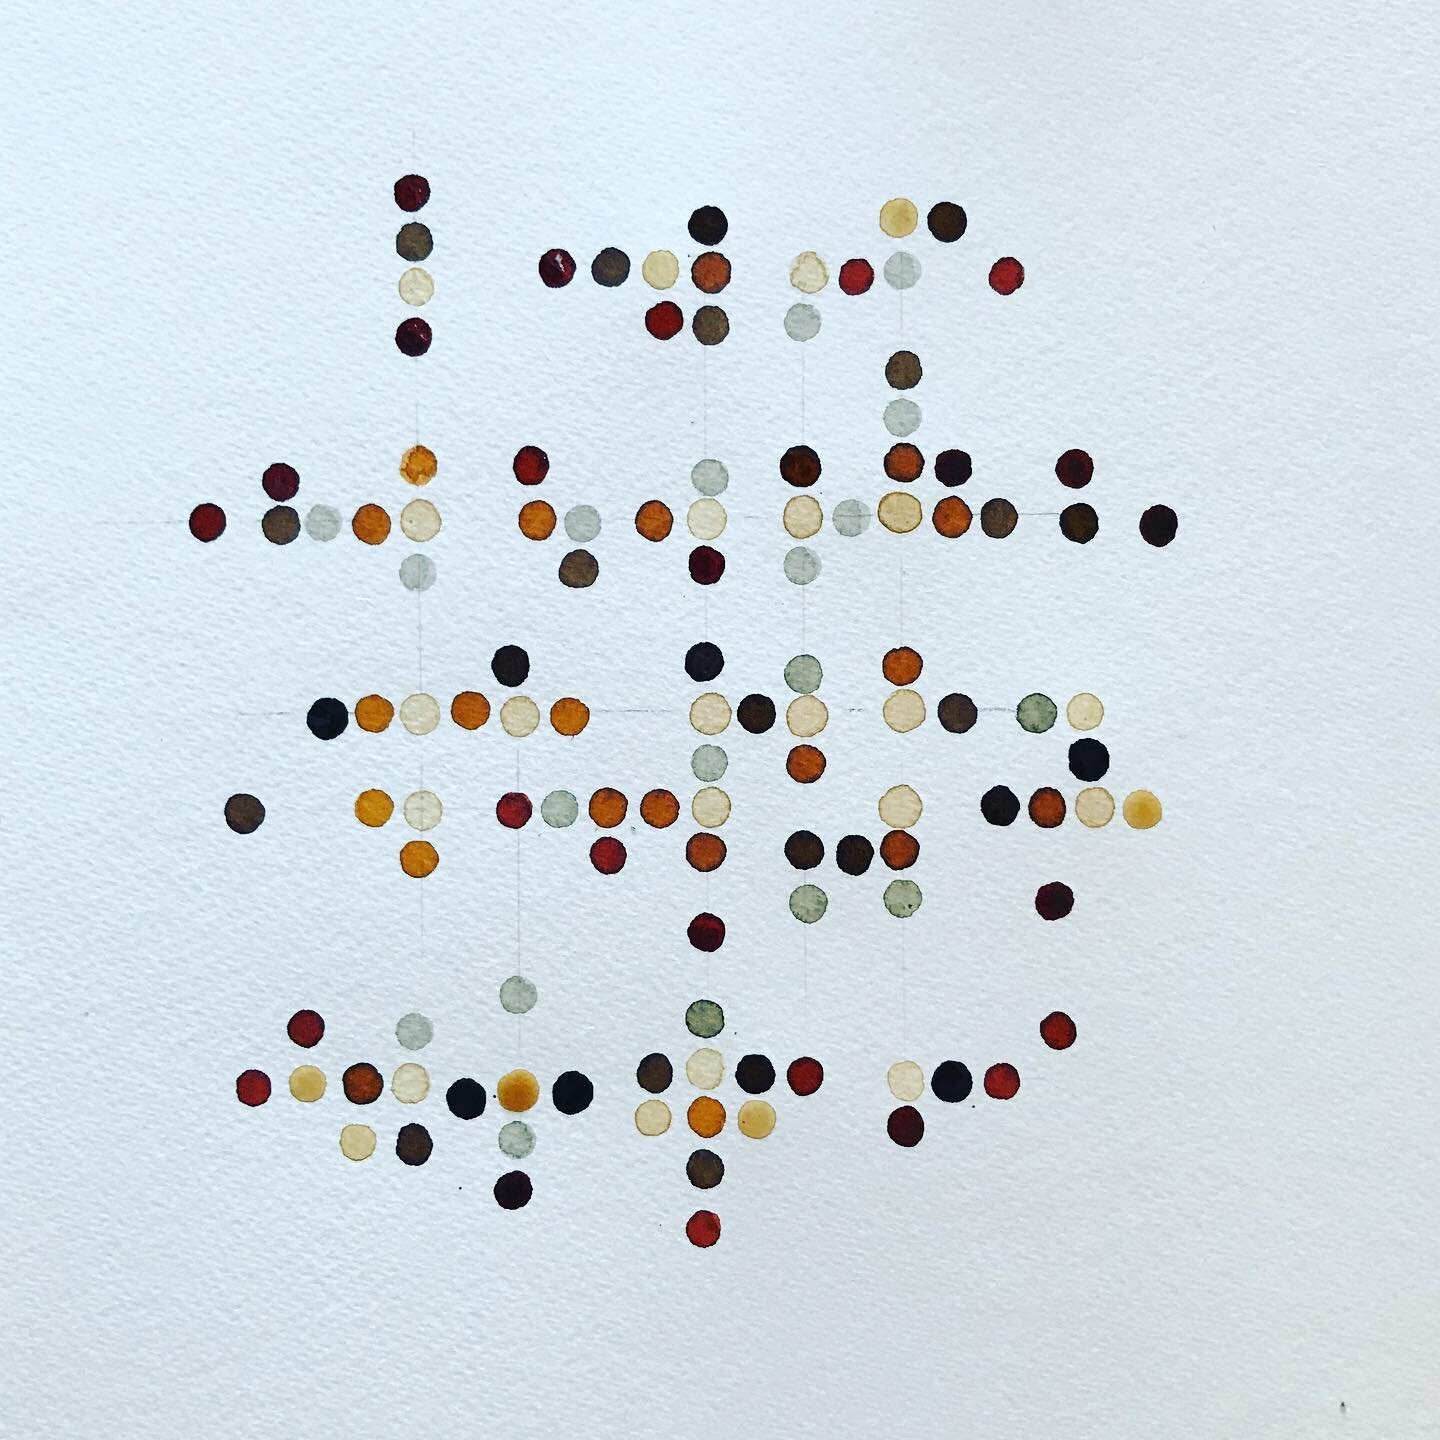 Meditation Dot Drawing, 2020. Mixed Inks, Walnut Ink, Coffee, and Tea on 300g watercolour paper.
 
During the first lockdown between March-June 2020, I remember feeling like I was living a nightmare. I remember feeling trapped, and scared for my kids